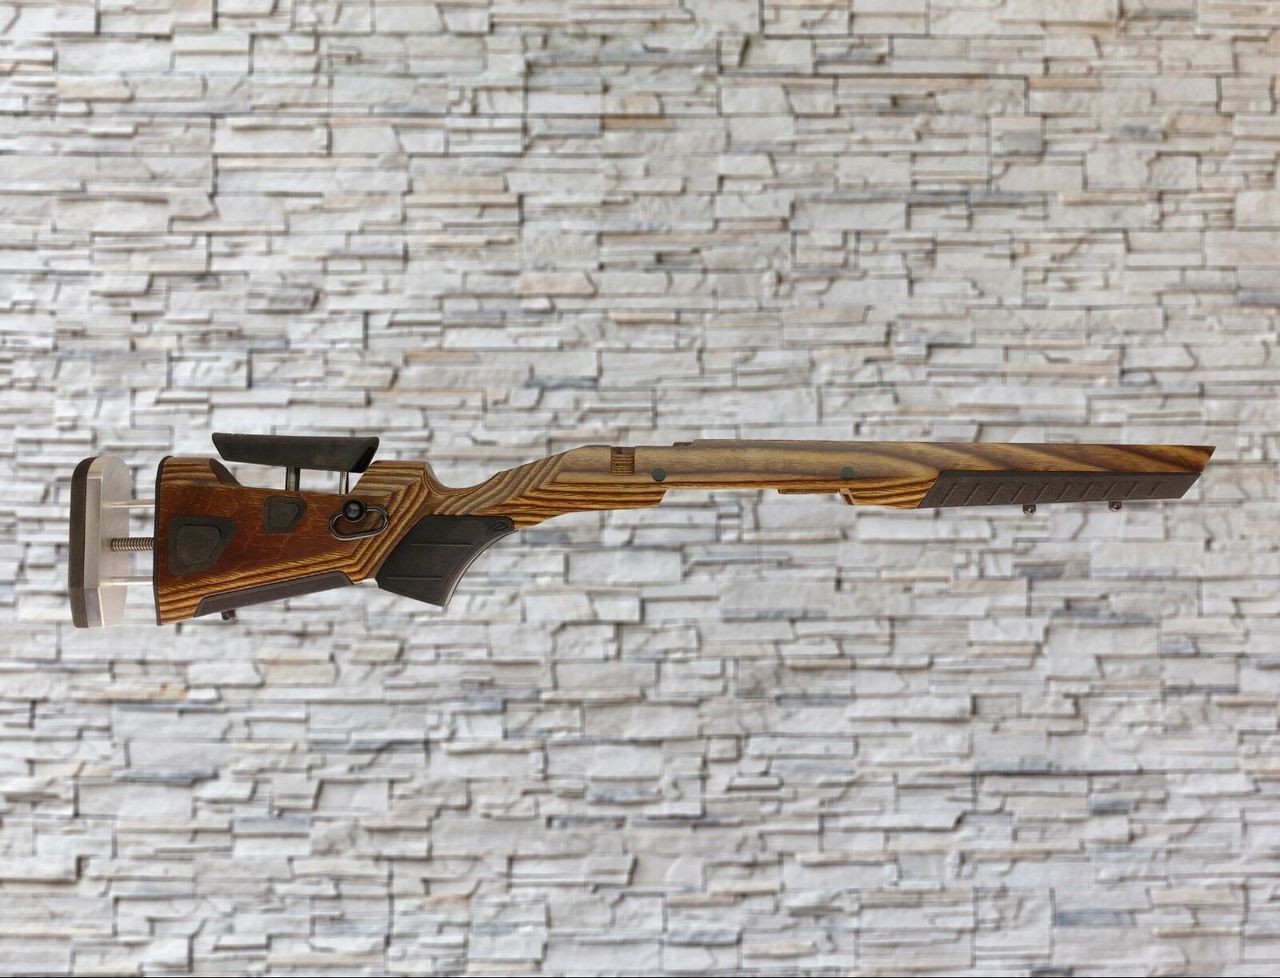 Boyds At-One Nutmeg Stock Browning X-Bolt Long Action Tapered Barrel Rifle